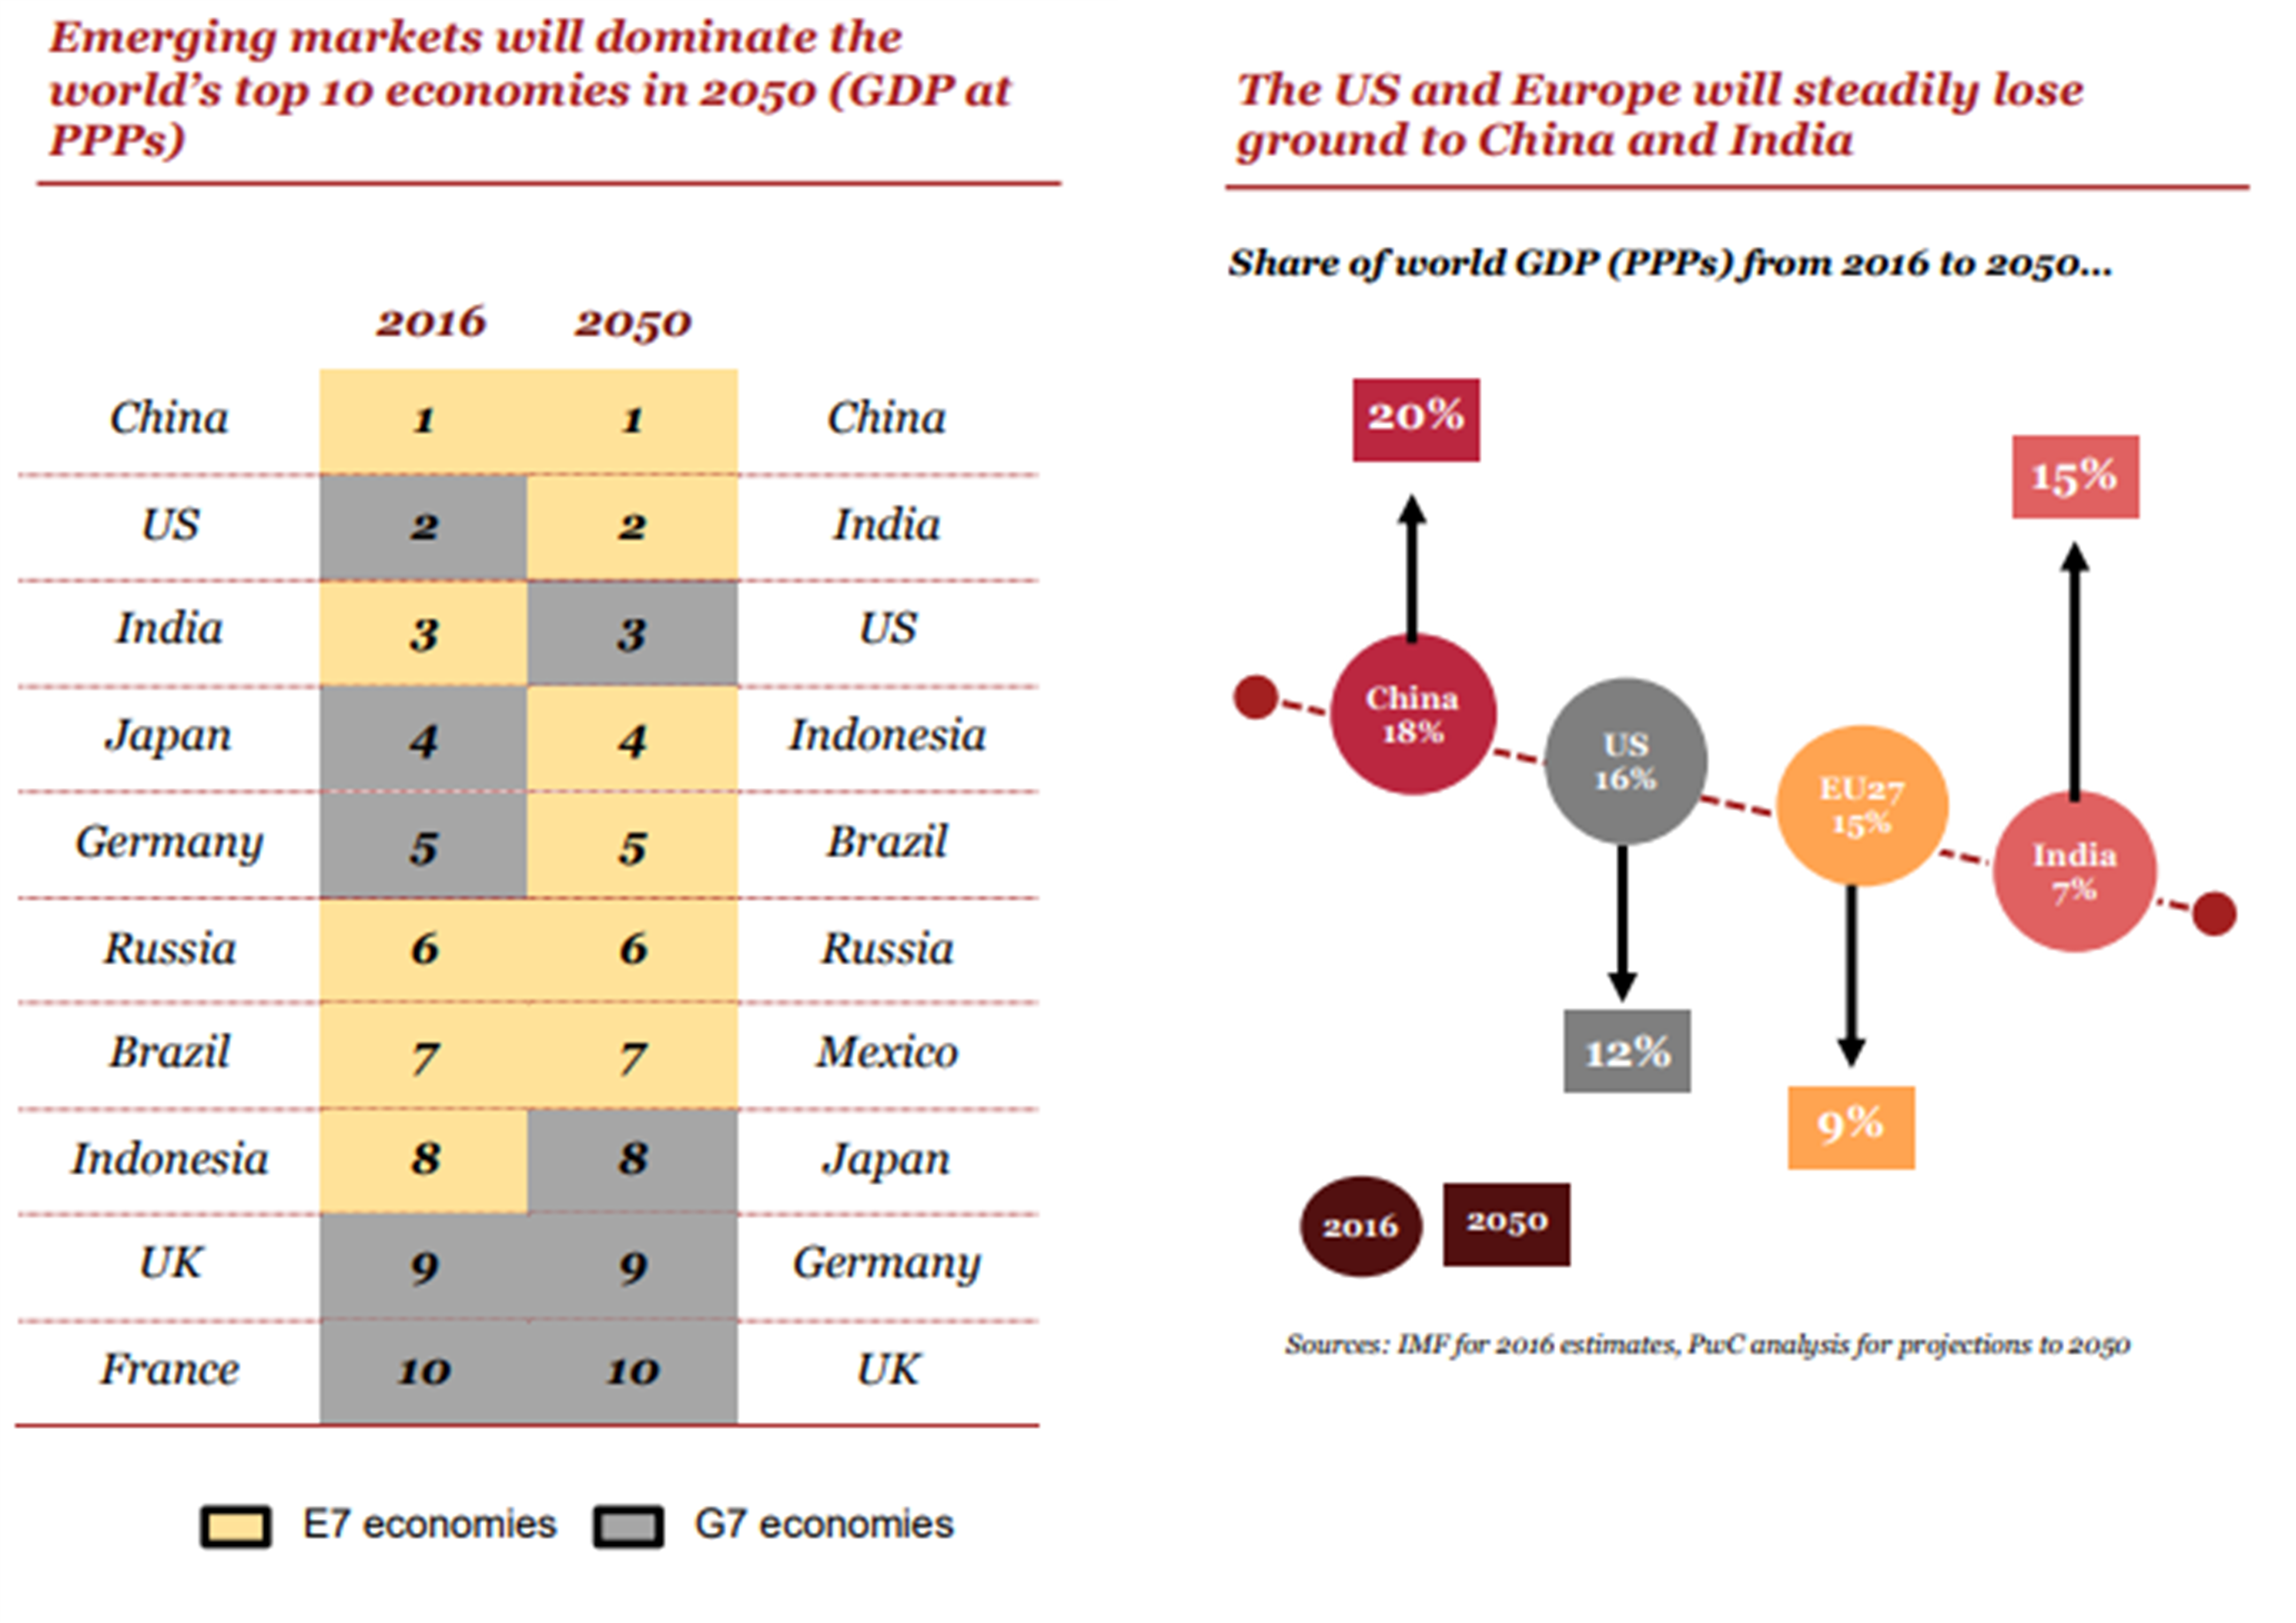 Source: PwC: The World in 2050 – How will the global economic order change (February 2017)